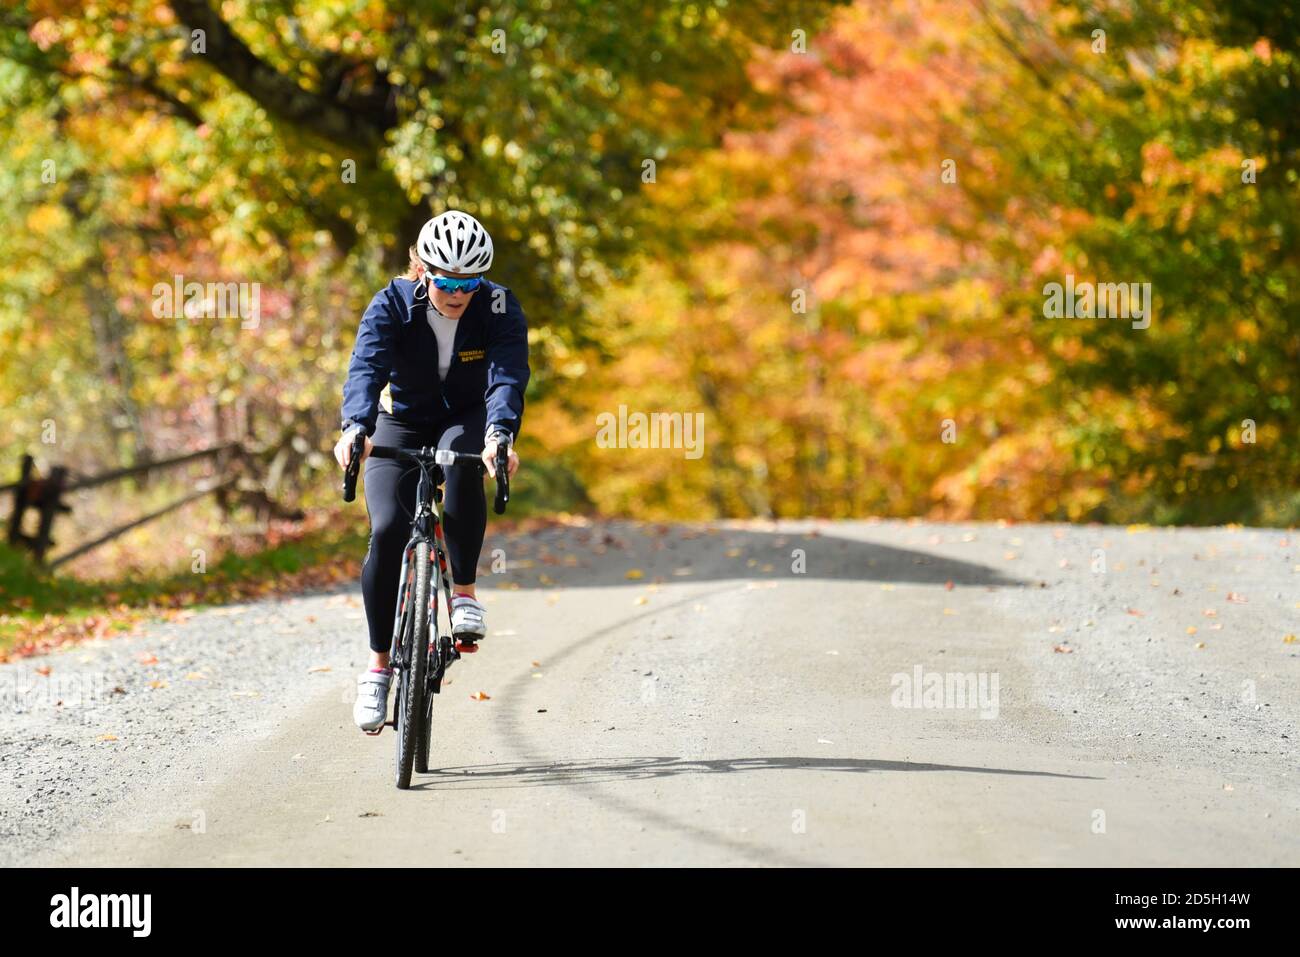 Bicyclist riding on a dirt road by colorful autumn maple trees near Craftsbury Outdoor Center, Craftsbury, VT, New England, USA. Stock Photo